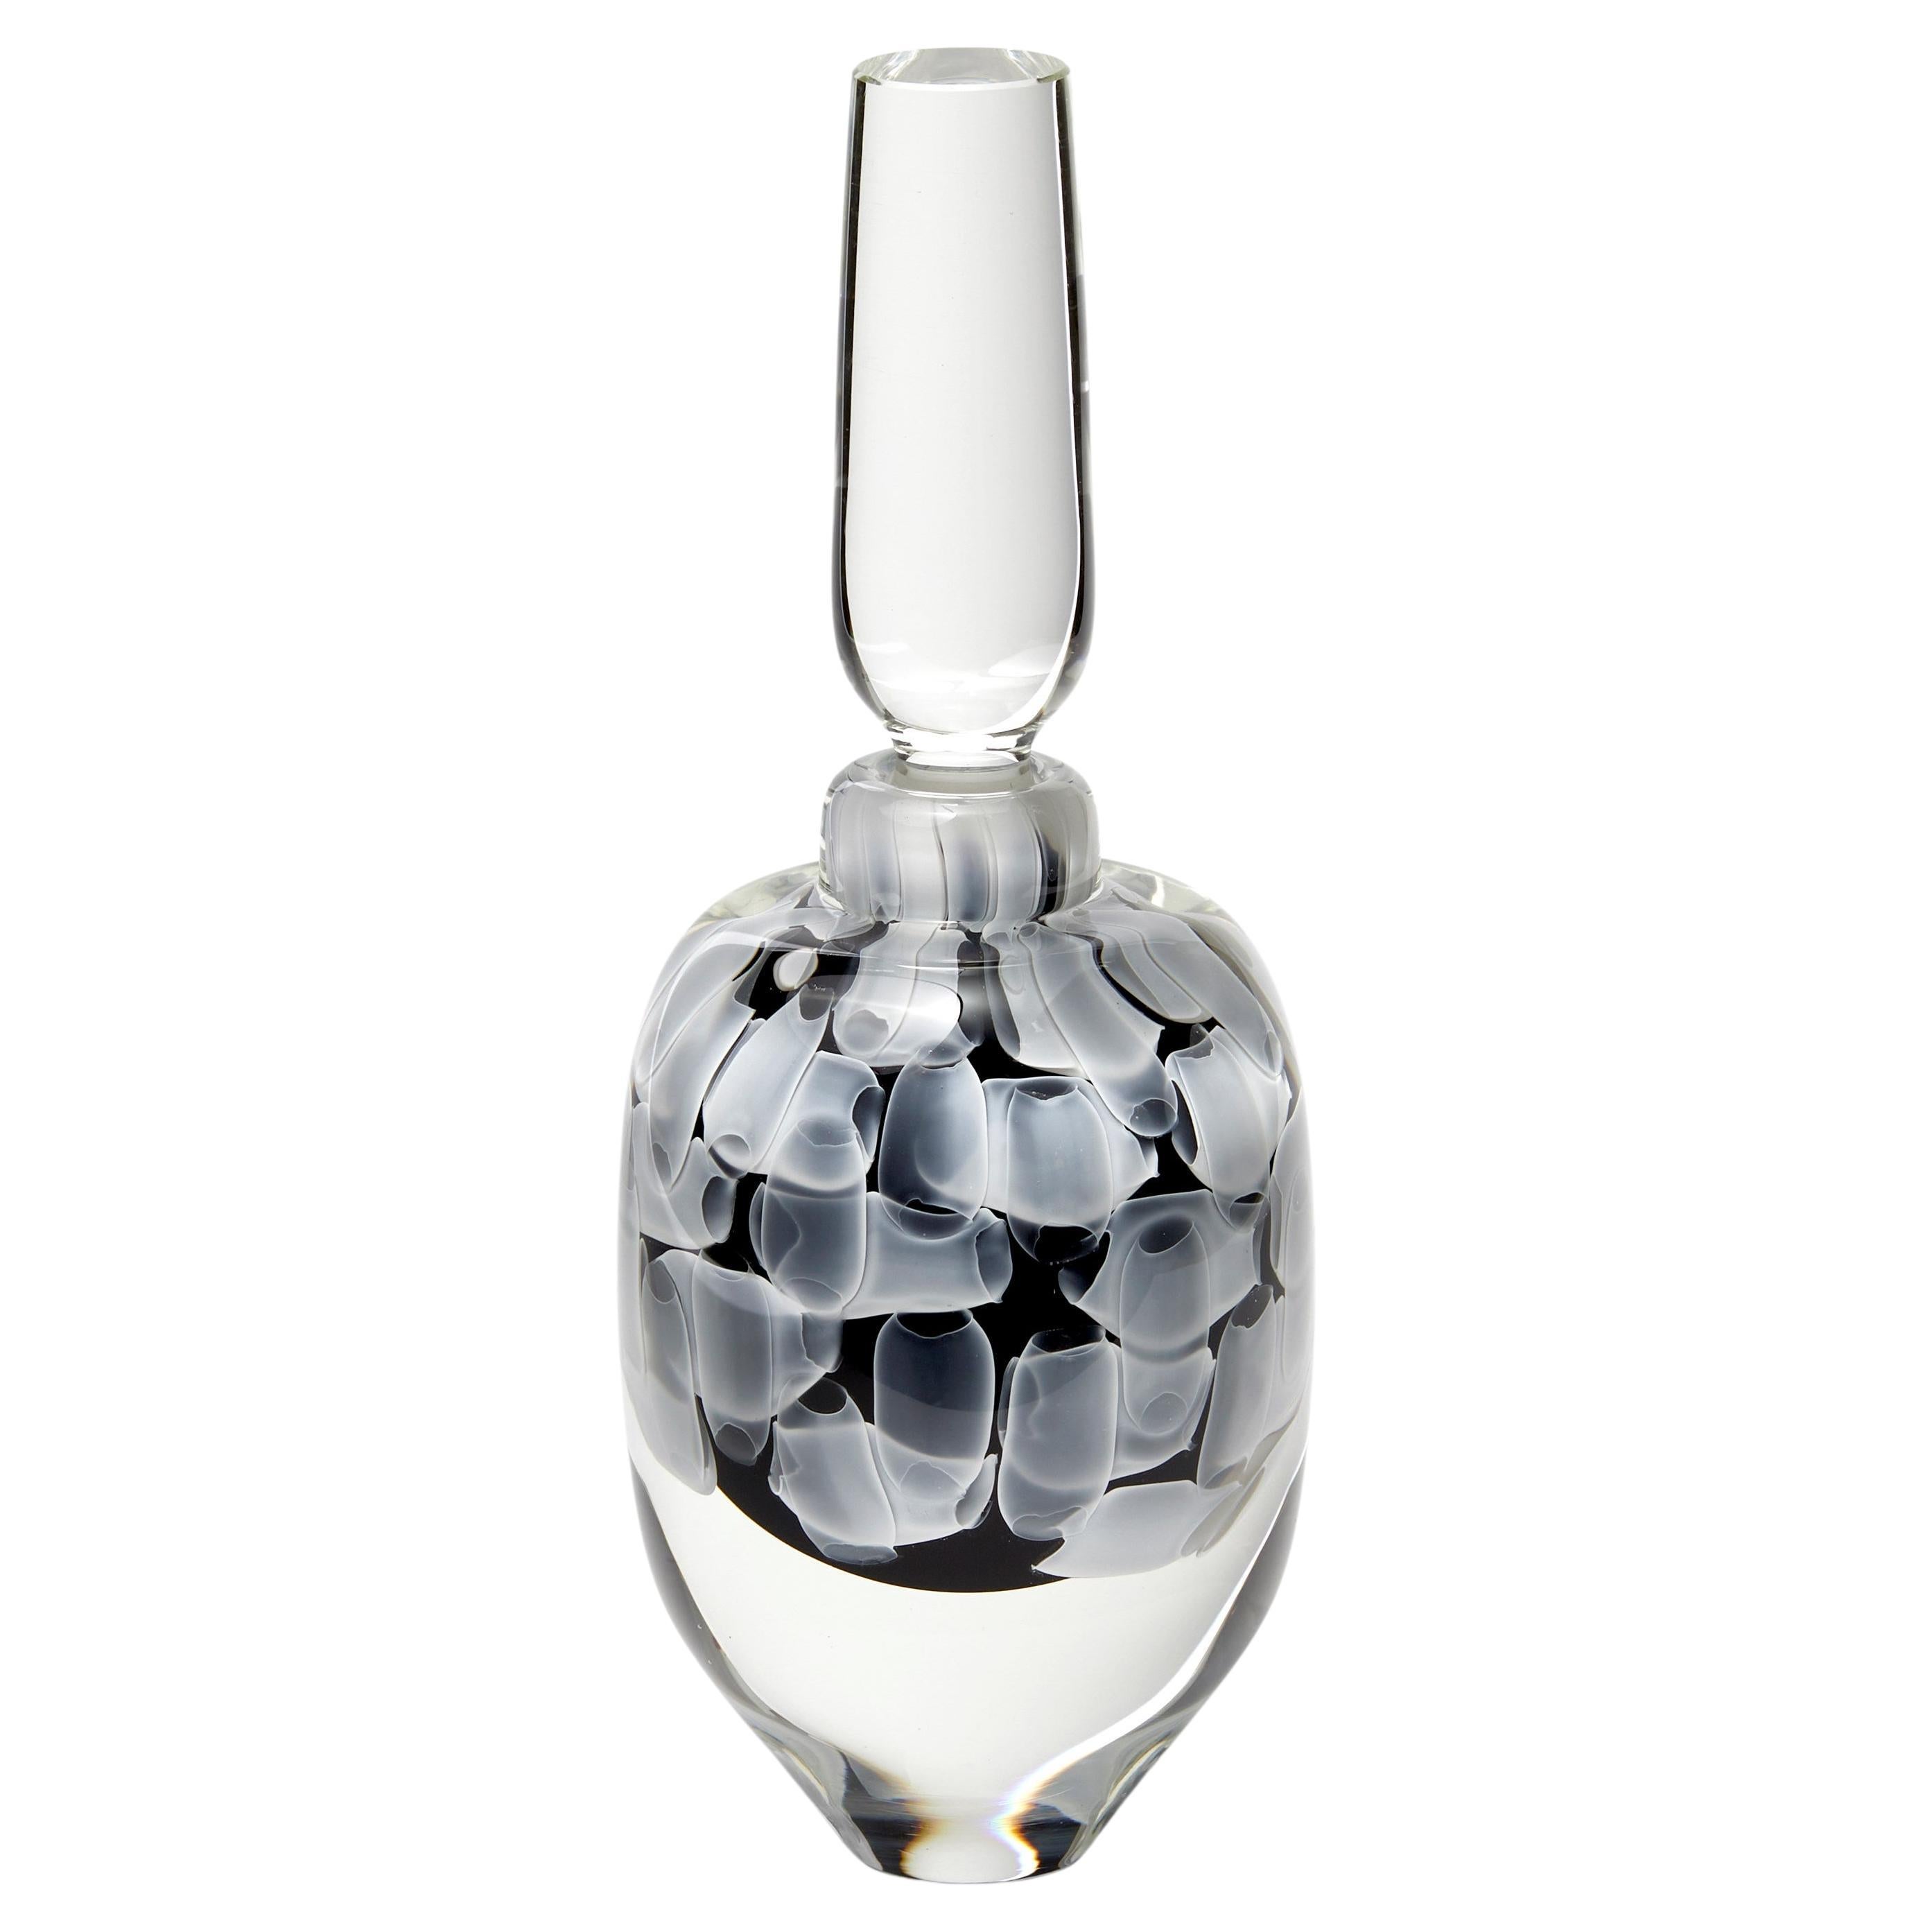 Beula, a Black, White & Clear Large Sculptural Glass Bottle by Peter Bowles